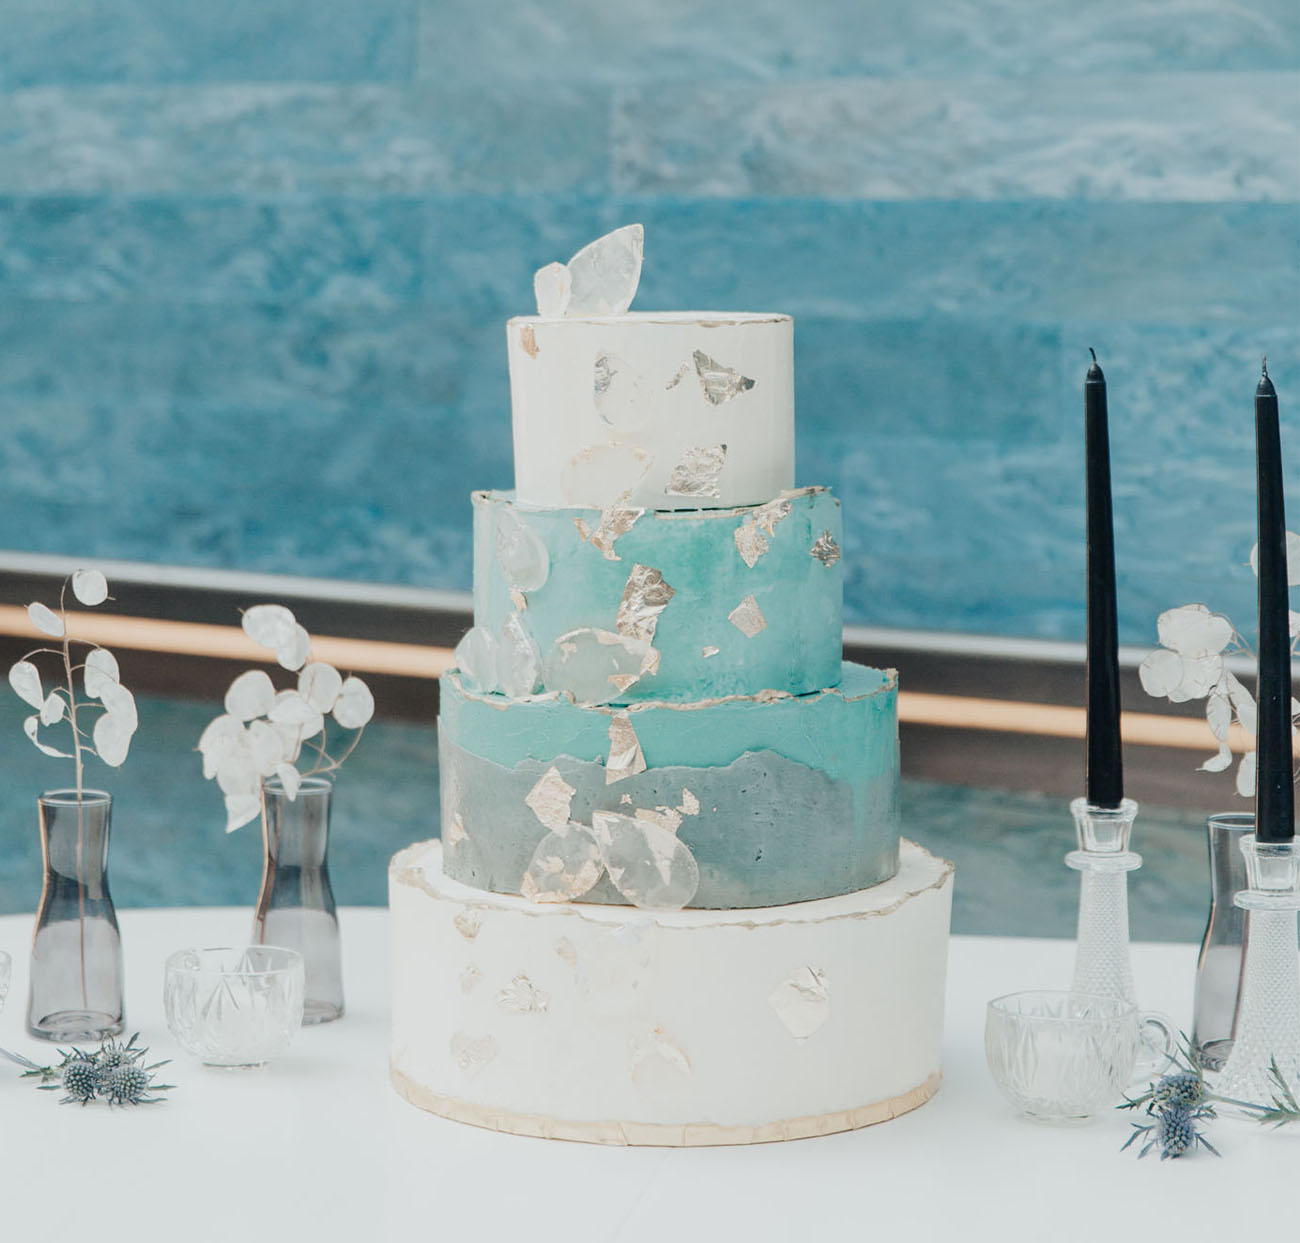 The wedding cake was done with white and blue tiers, with silver edges and edible glass